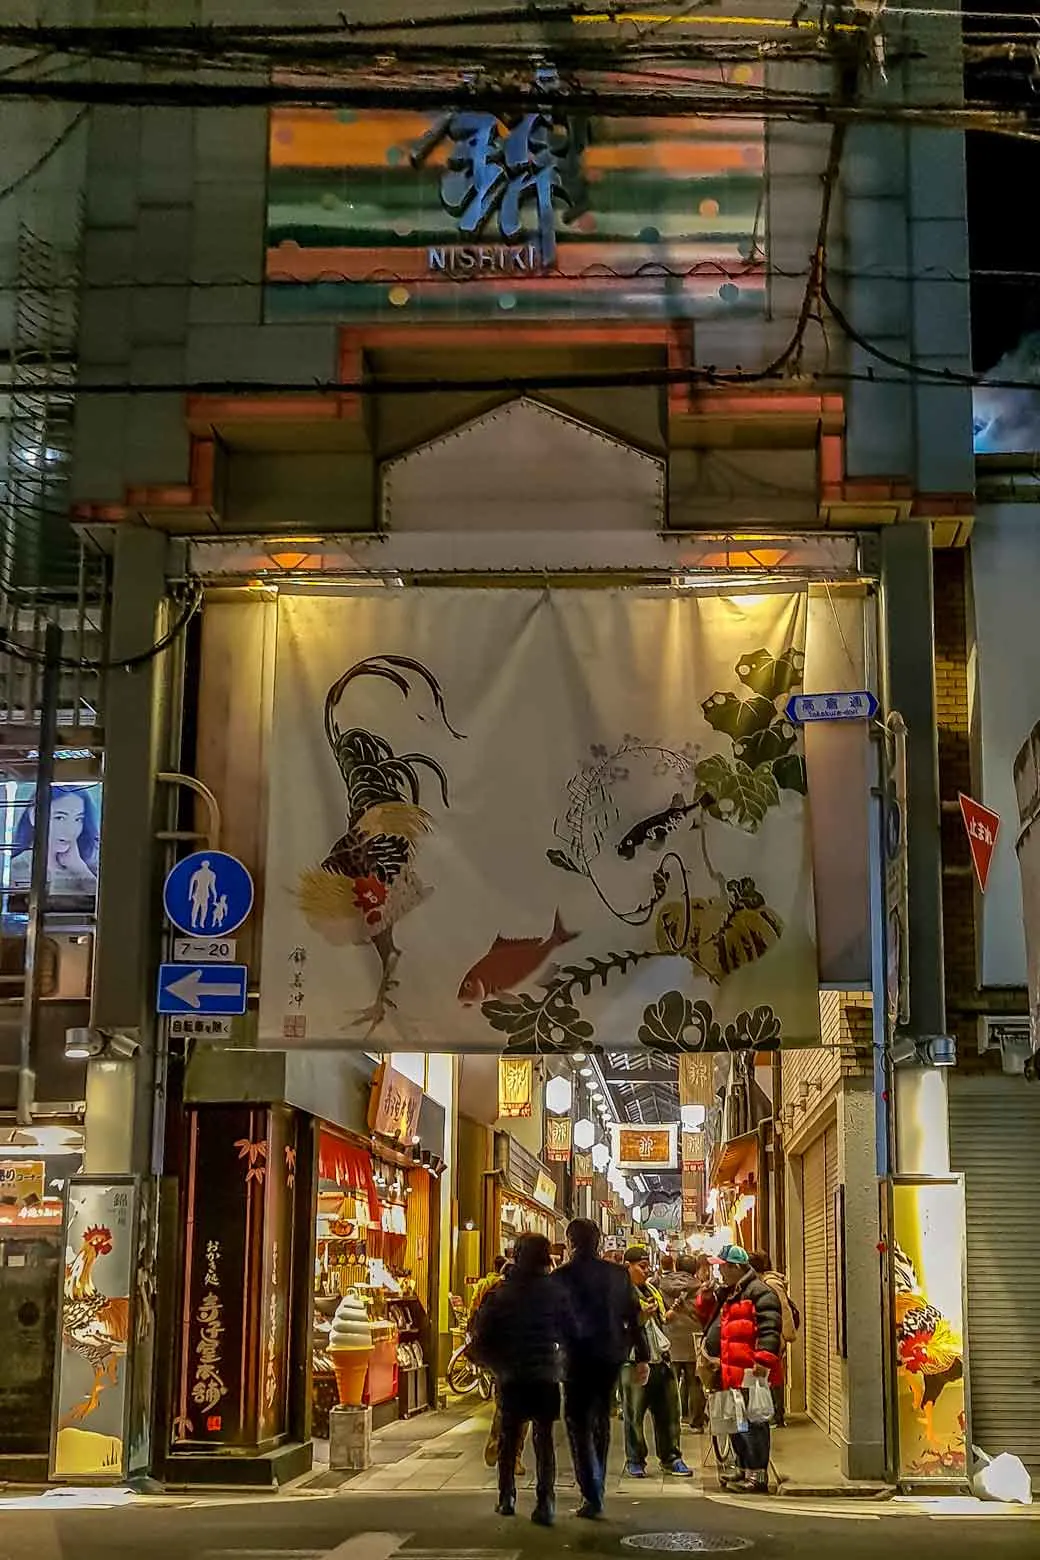 An eastern entrance to Nishiki Market in Kyoto